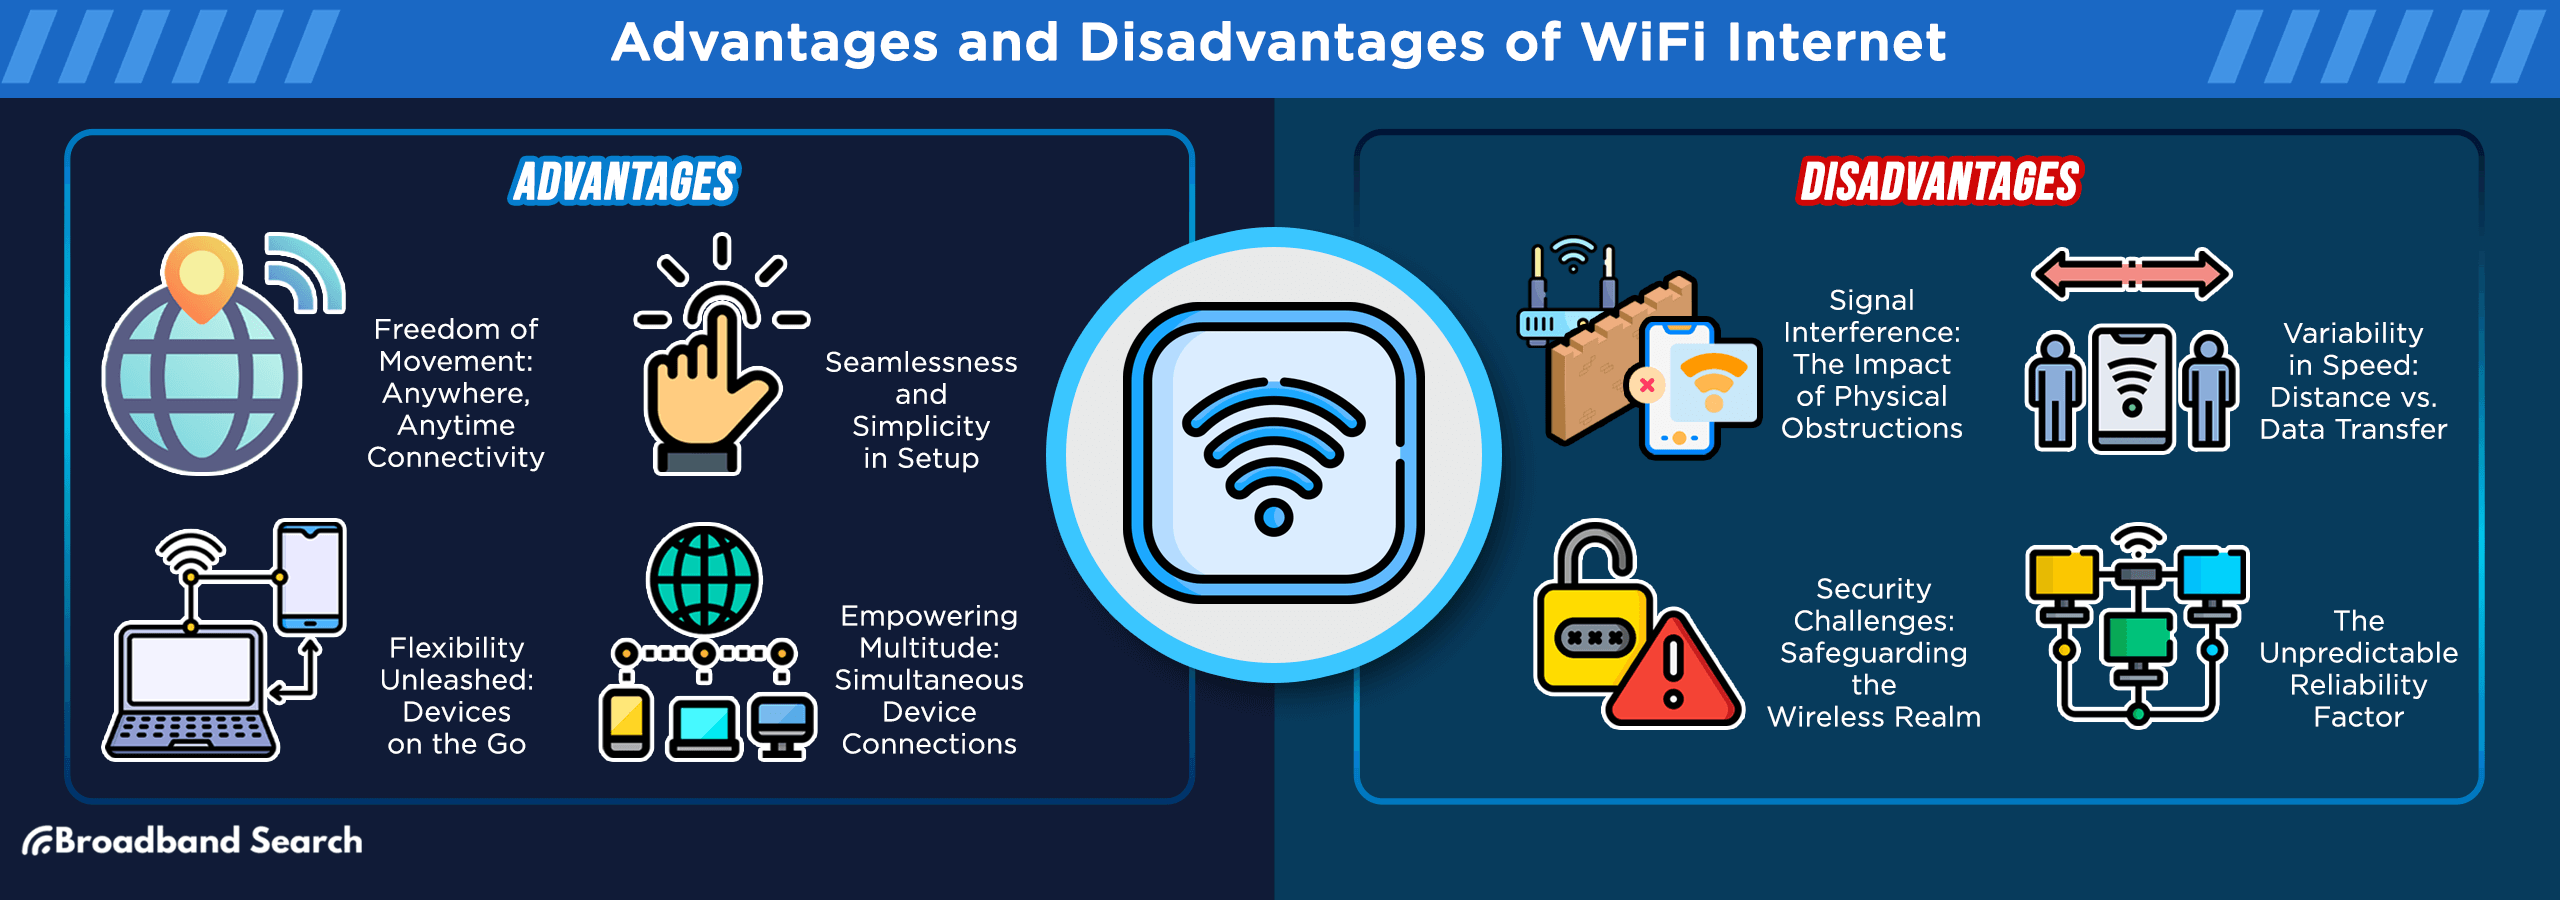 Advantages and disadvantages of wifi internet